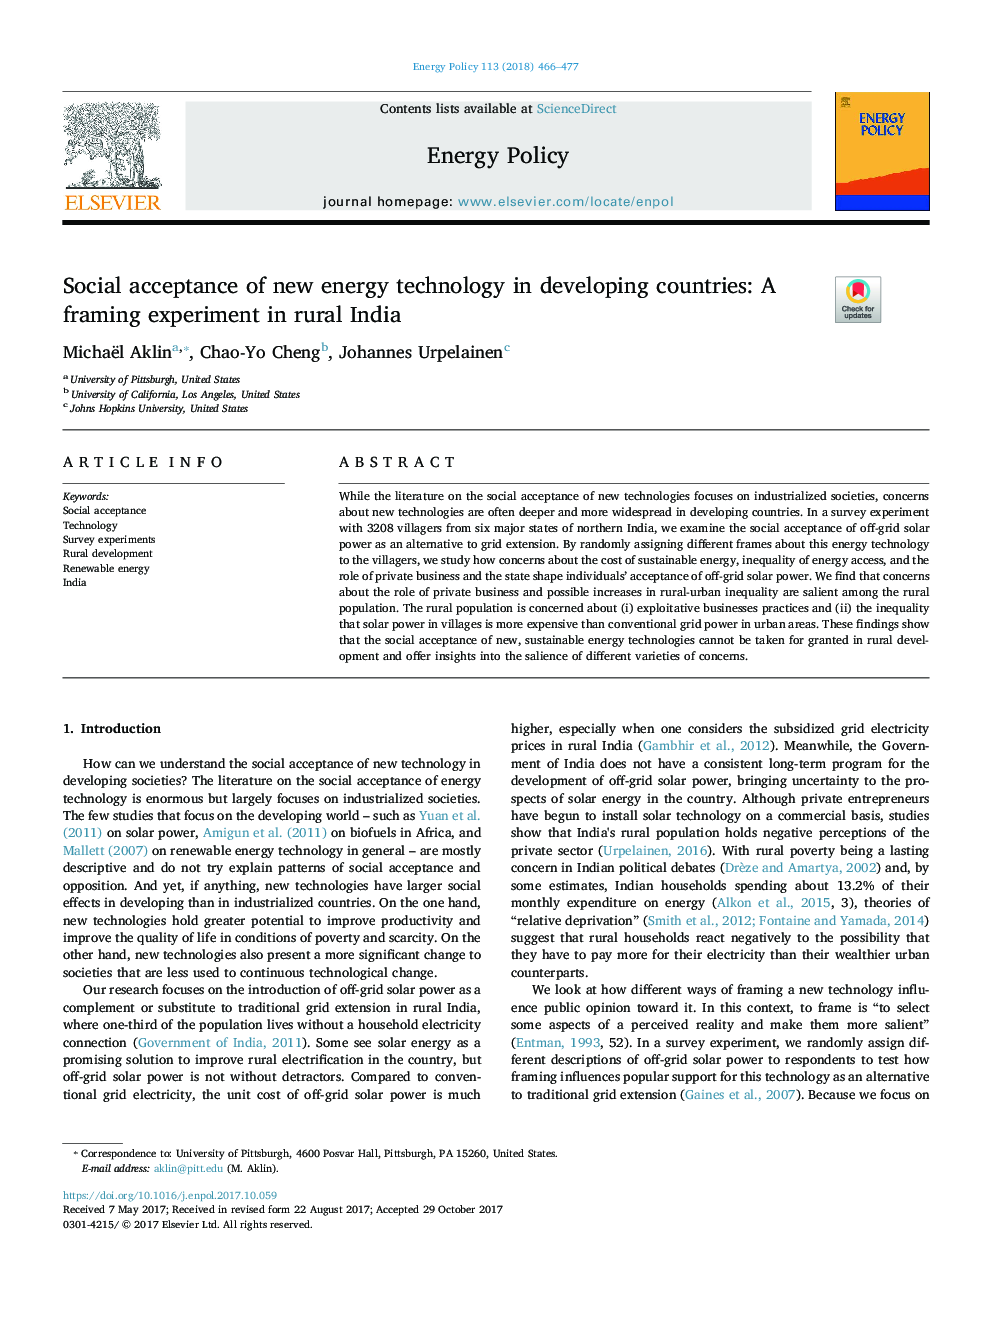 Social acceptance of new energy technology in developing countries: A framing experiment in rural India